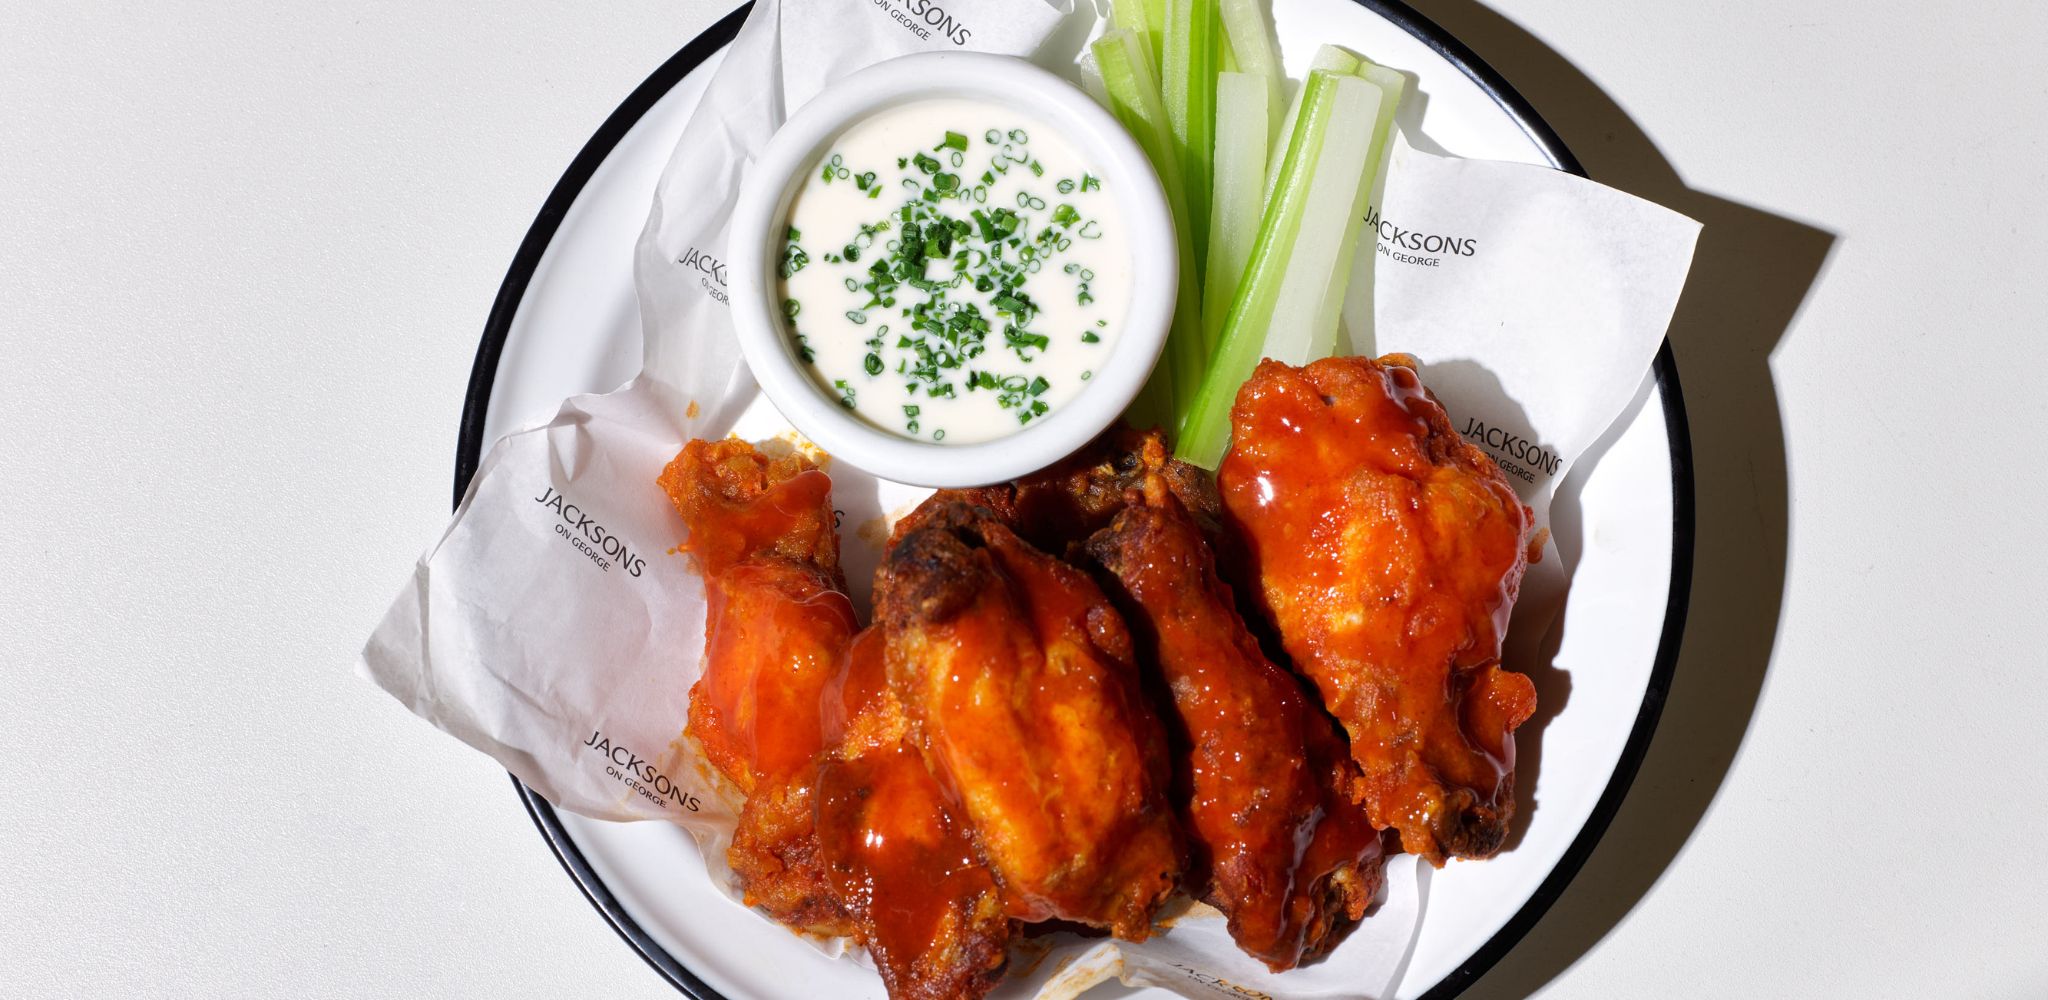 Buffalo fried chicken wings, with blue cheese sauce, chives and celery served on Jacksons on George logo